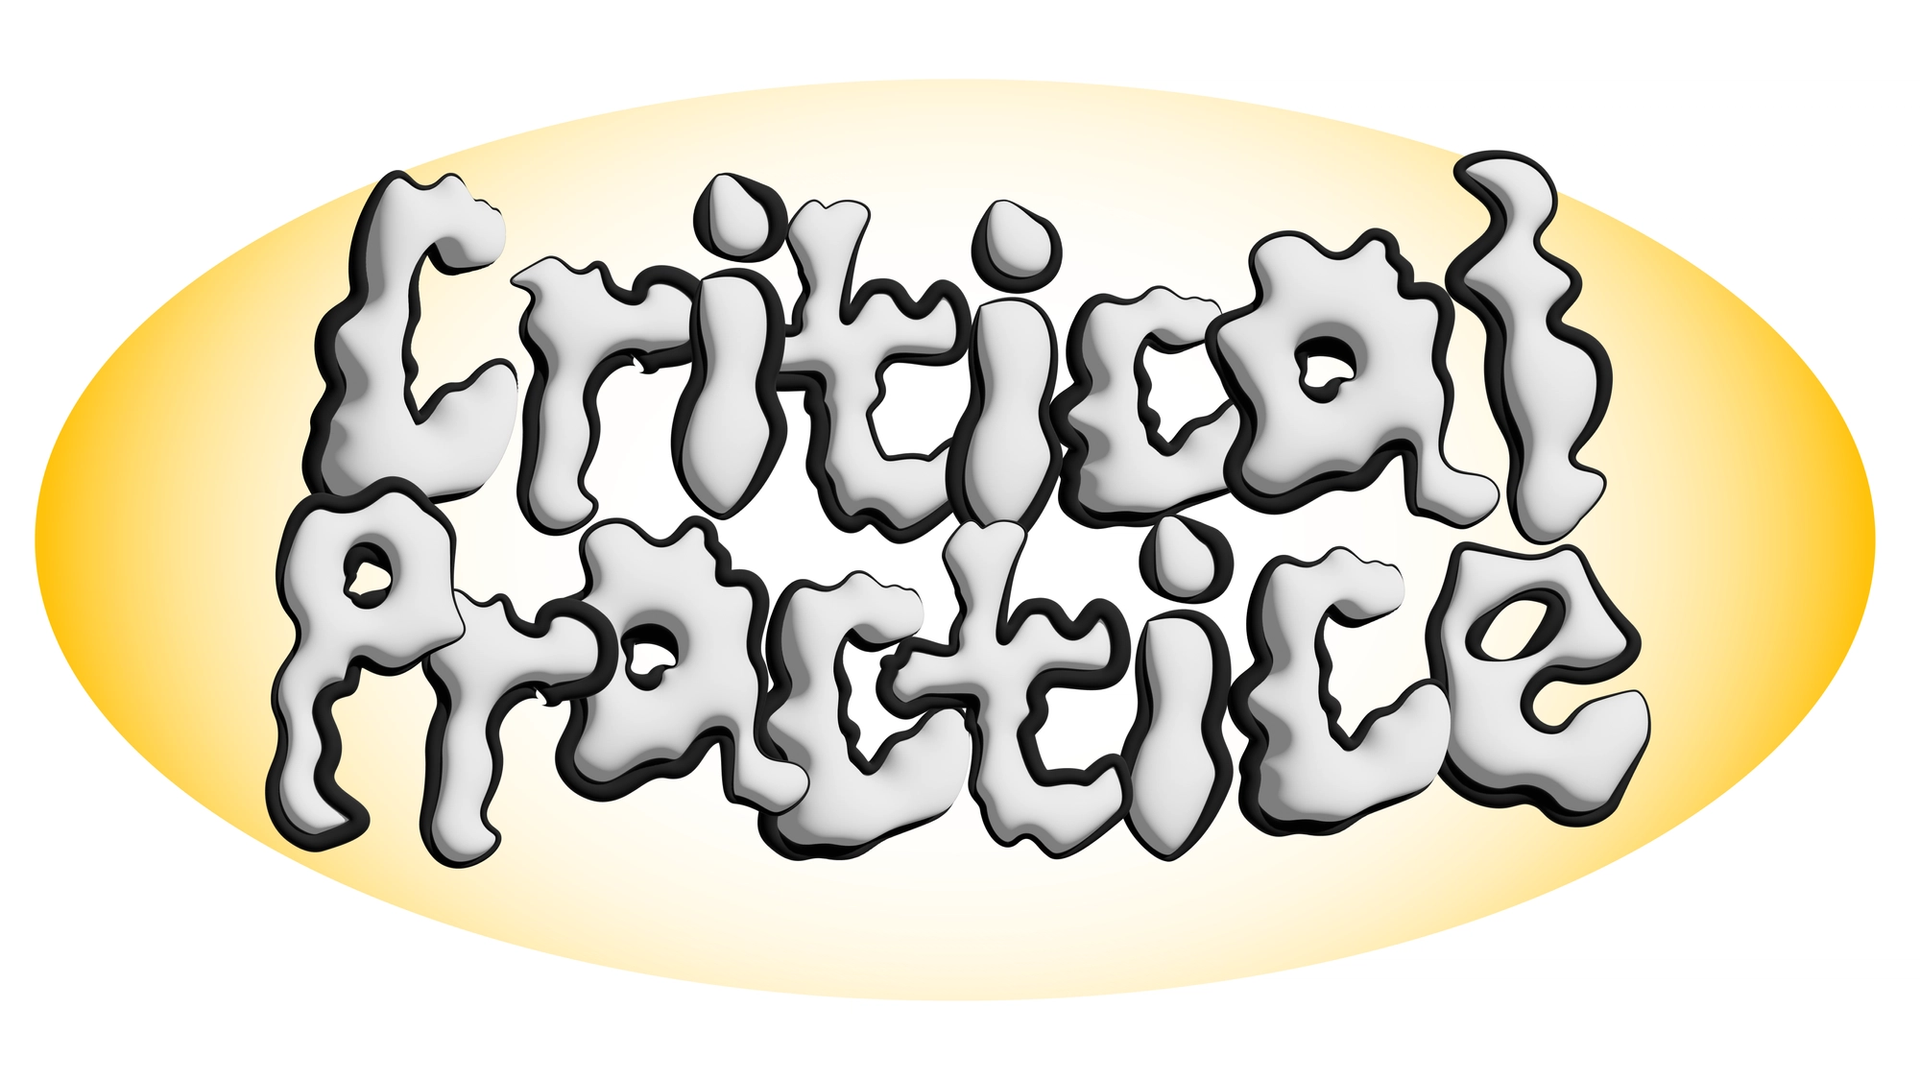 The words Critical Practice in white with black outline, on an ombre yellow oval background